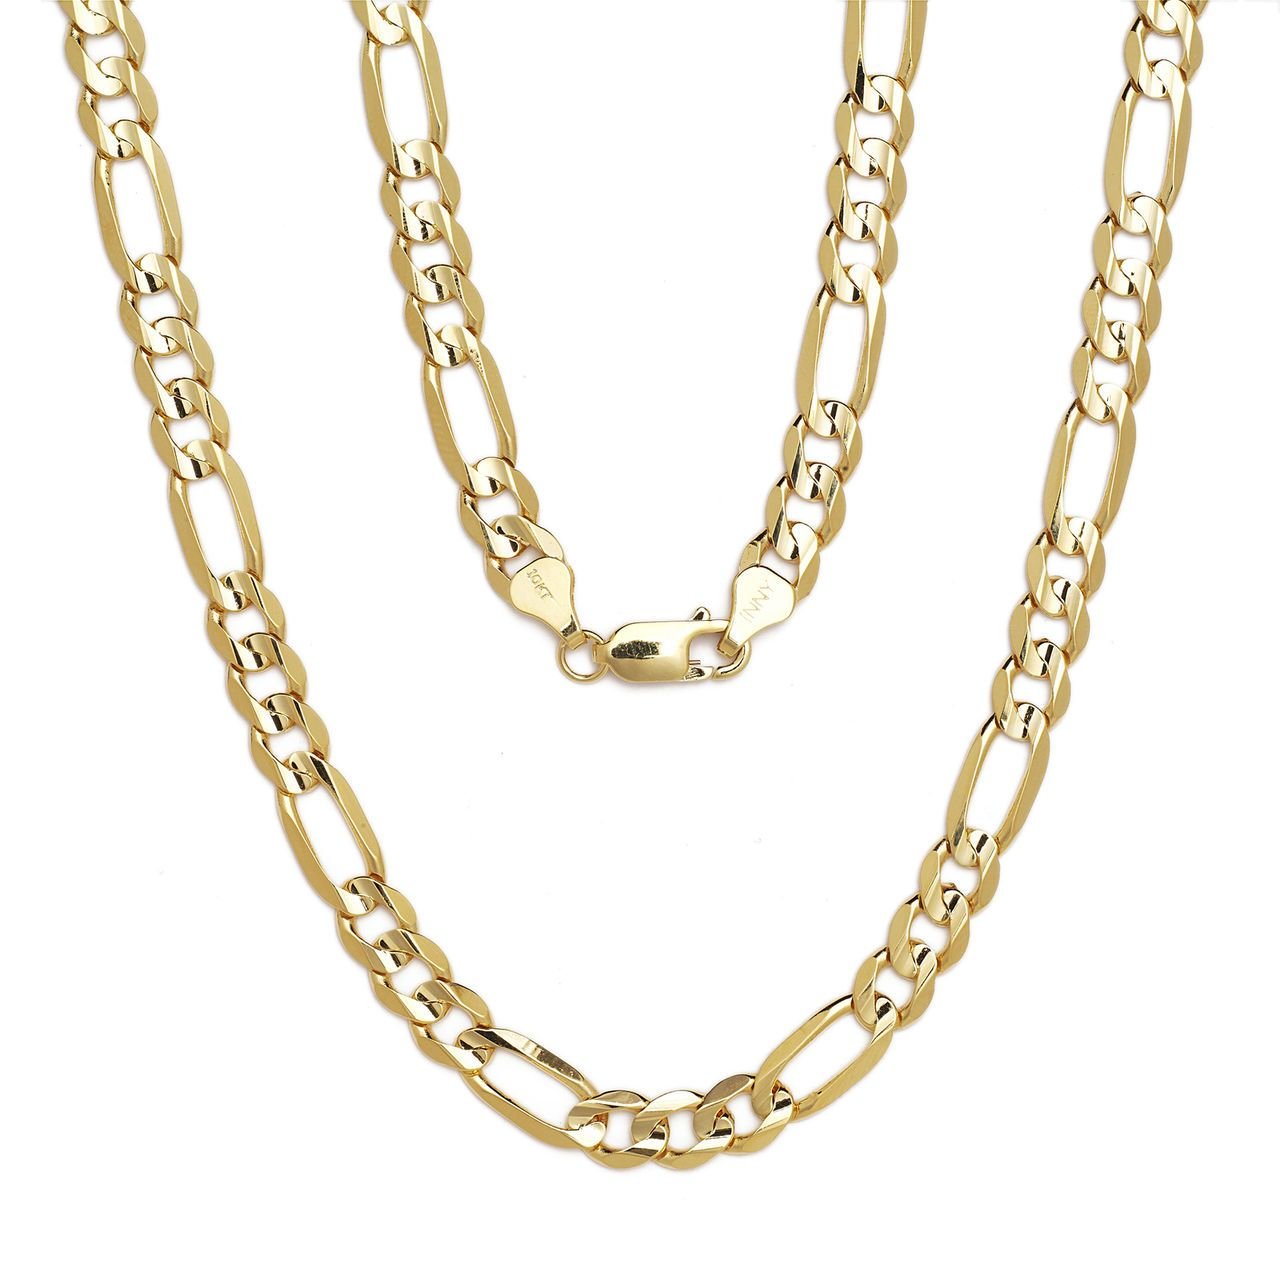 10k Yellow Gold Figaro Chain Necklace with Concave Look, 0.25 Inch (6.3mm)